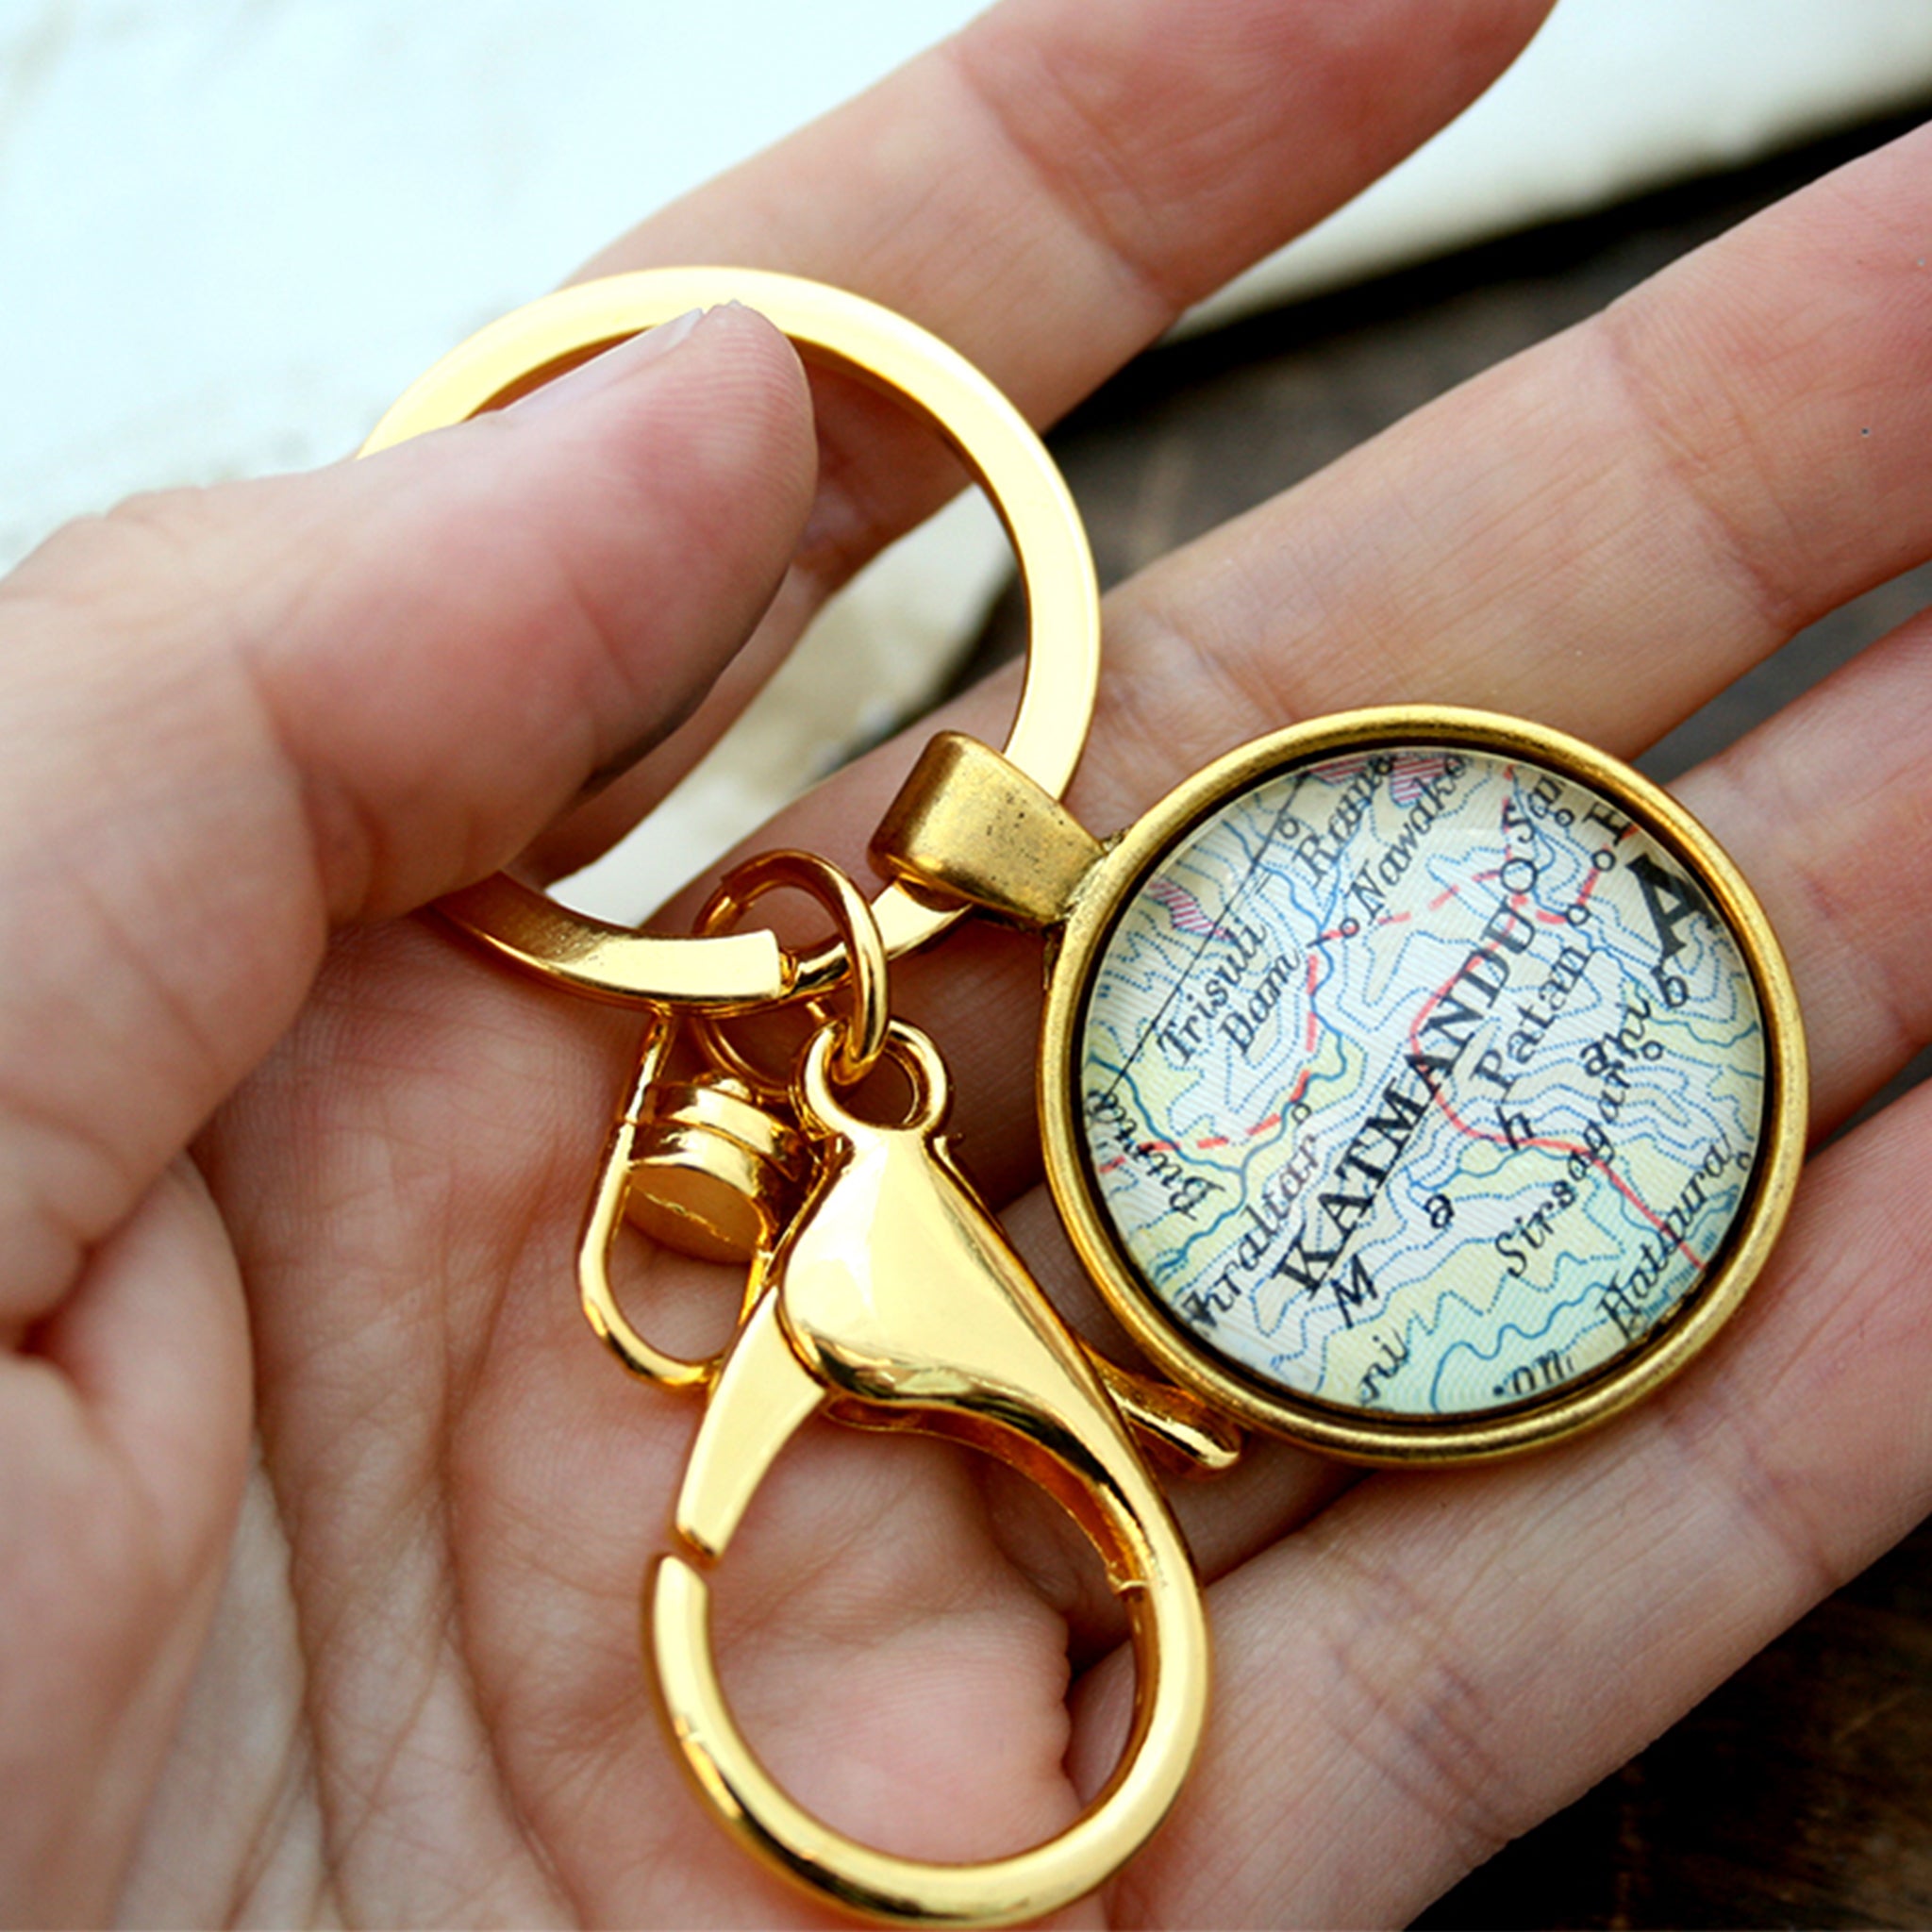 Hold in hand Personalised keyring in gold color featuring map of Kathmandu